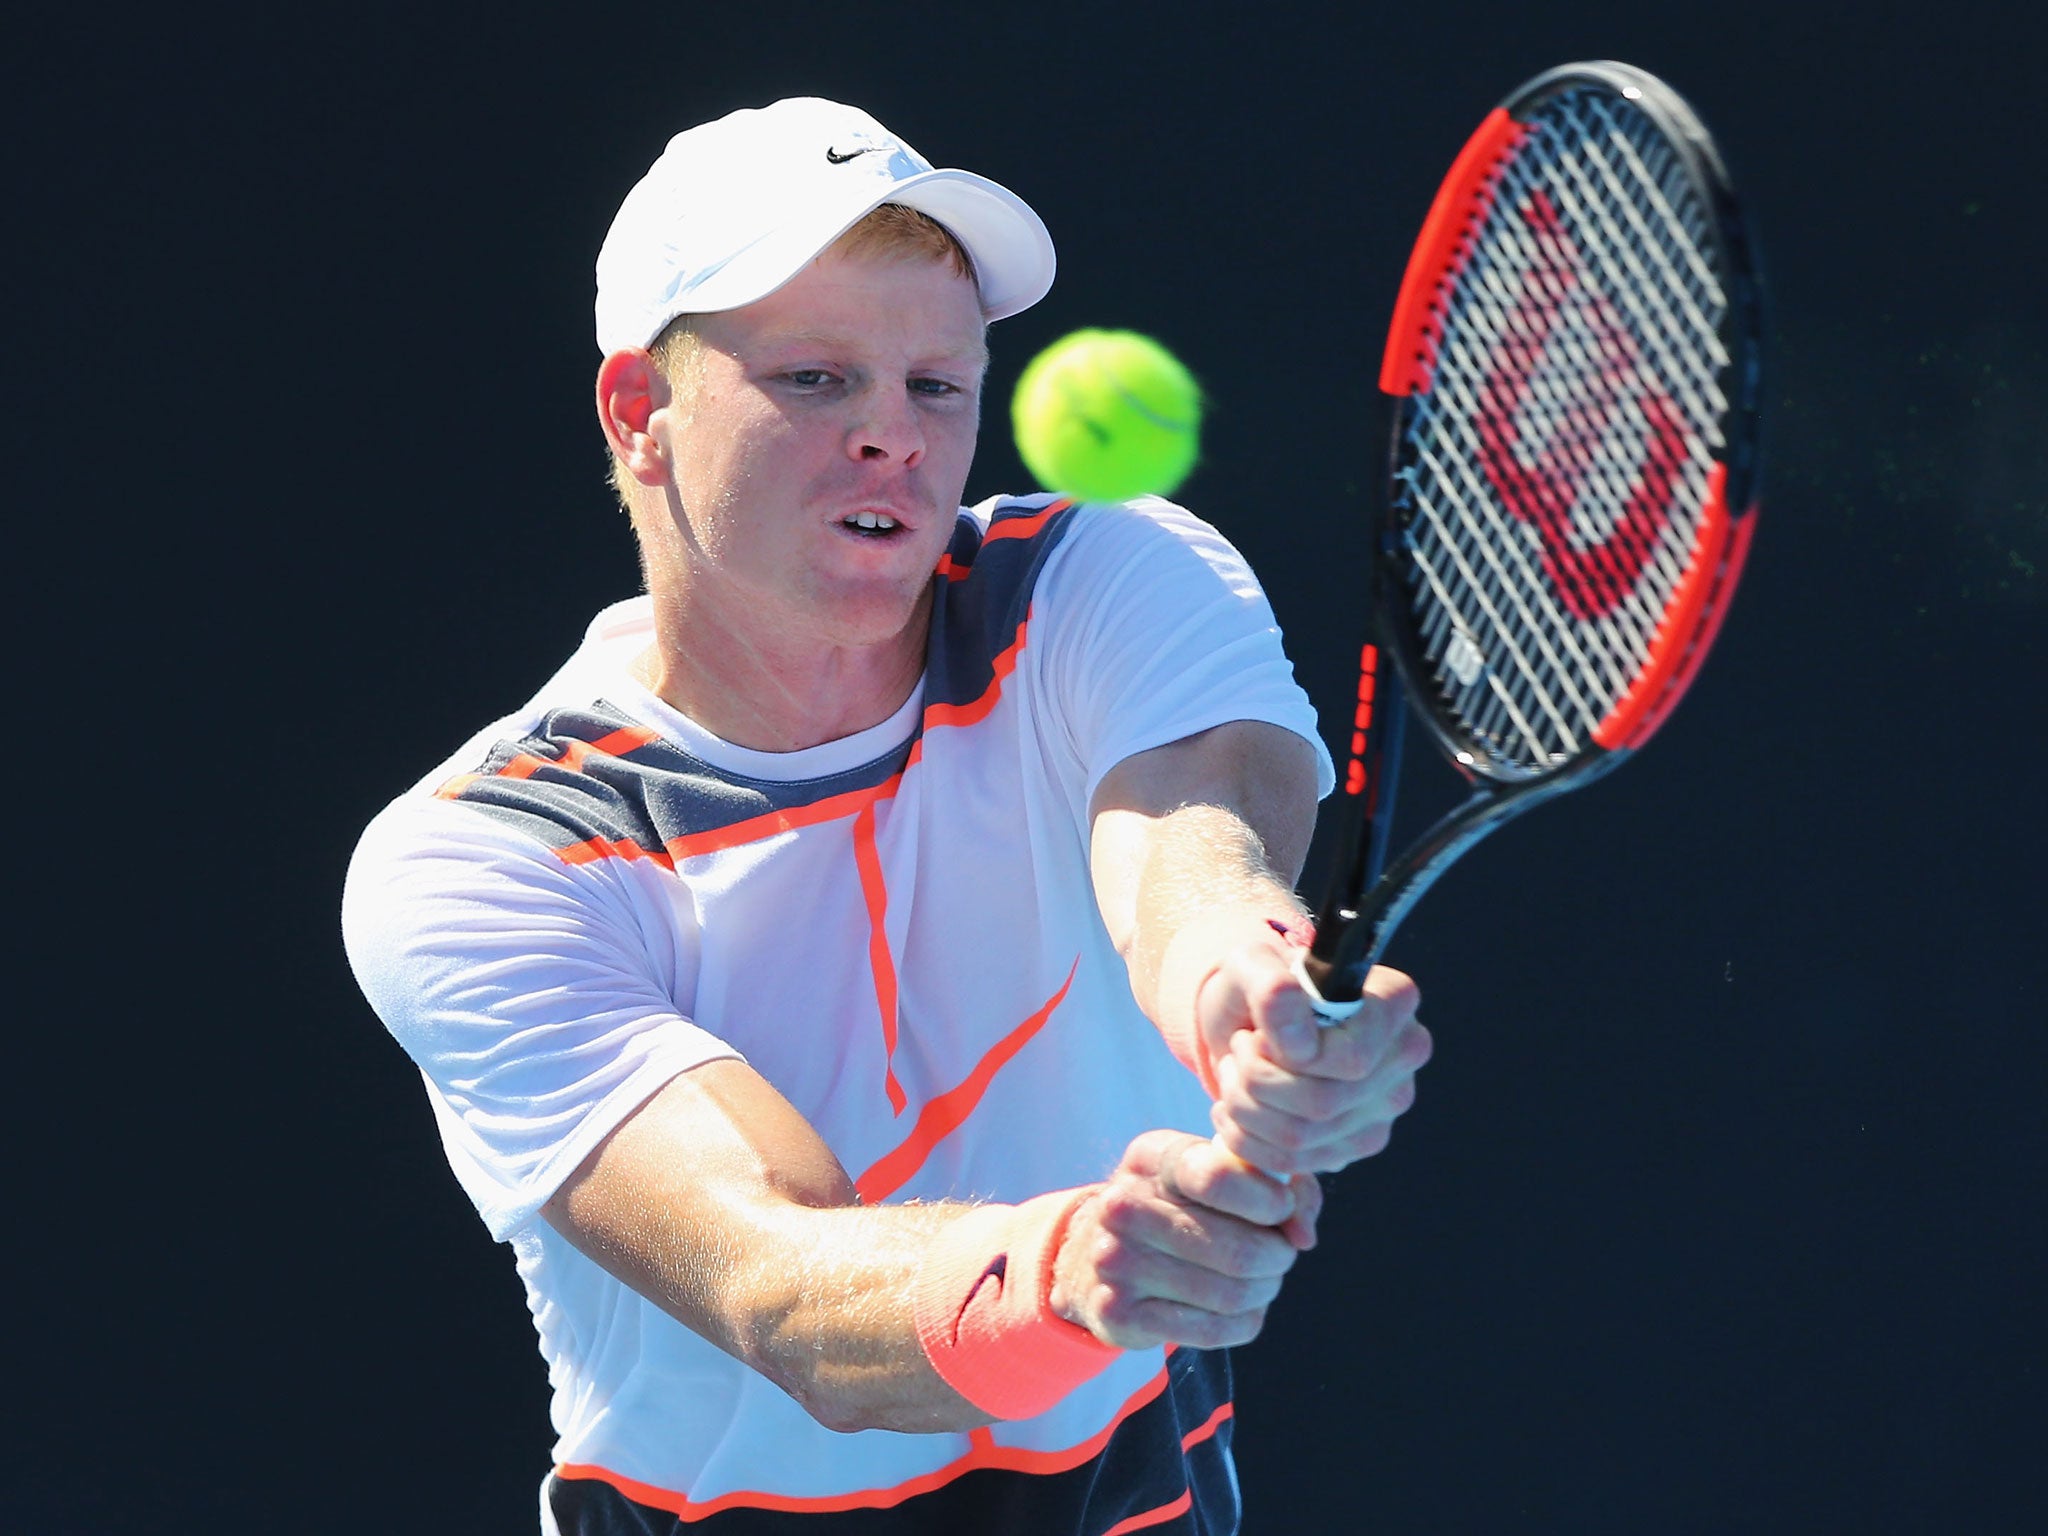 Edmund joins fellow Britons Andy Murray and Dan Evans in the second round